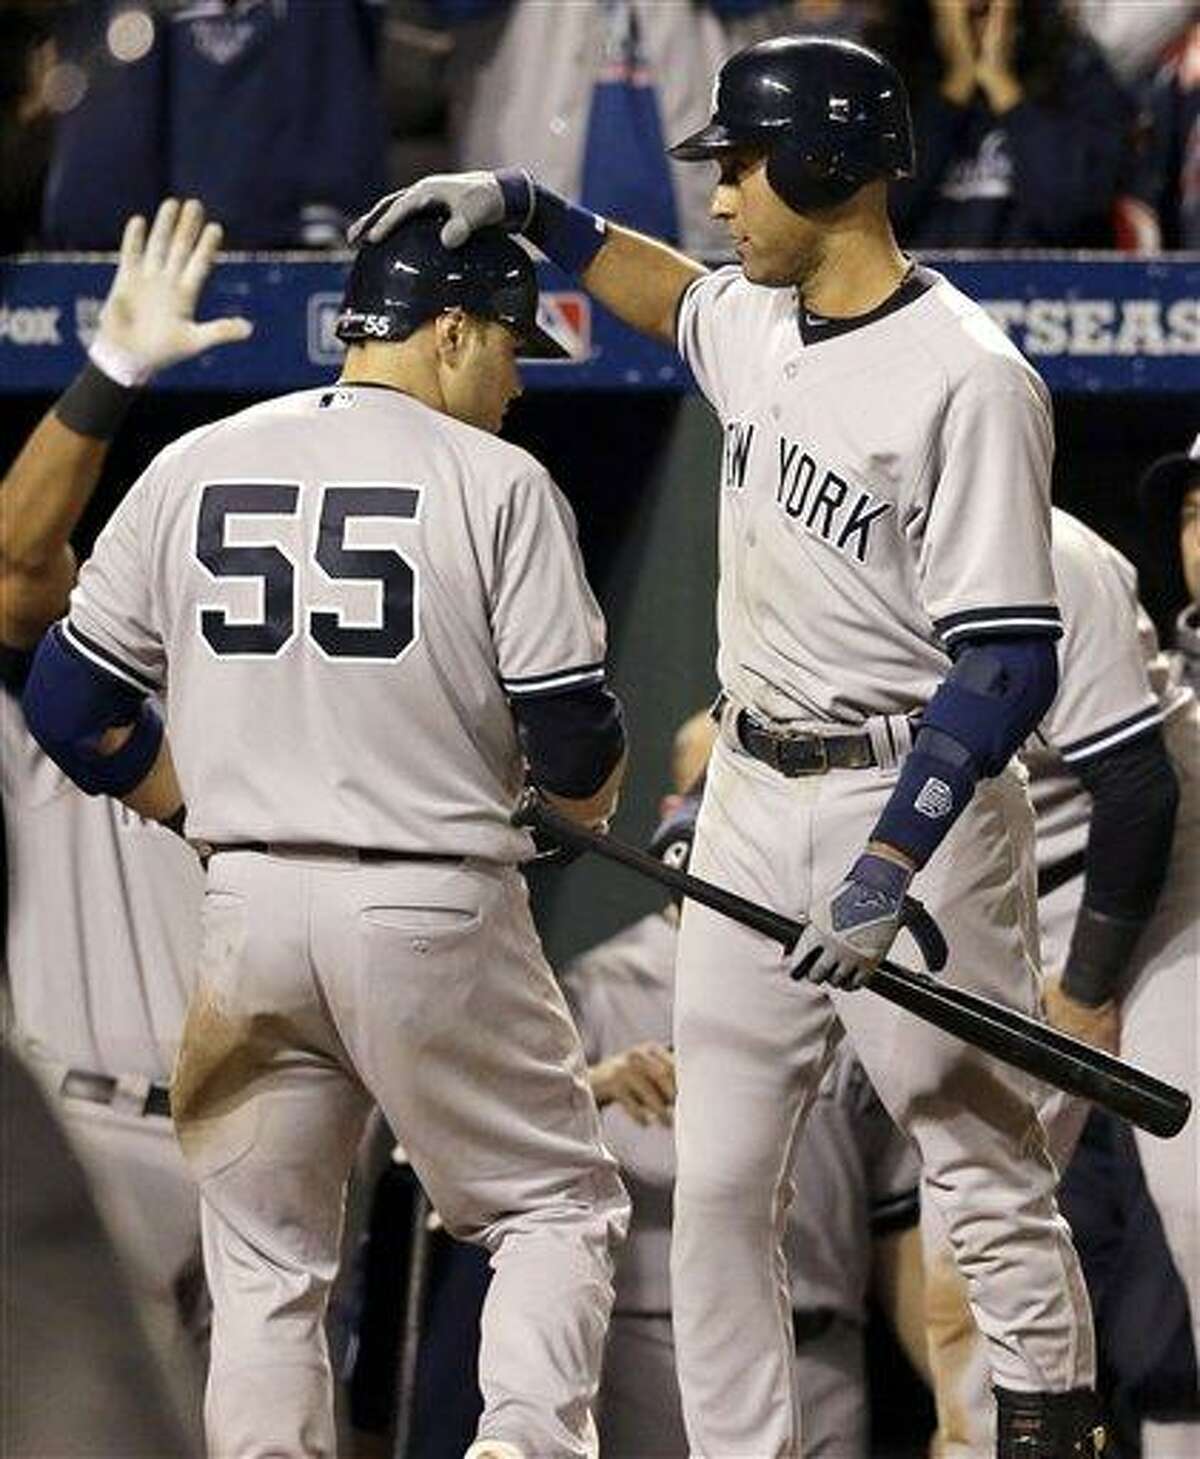 New York Yankees' Derek Jeter, right, congratulates teammate Russell Martin after Martin hit a solo home run in the ninth inning of Game 1 of the American League division baseball series against the Baltimore Orioles on Sunday, Oct. 7, 2012, in Baltimore. New York won 7-2. (AP Photo/Patrick Semansky)